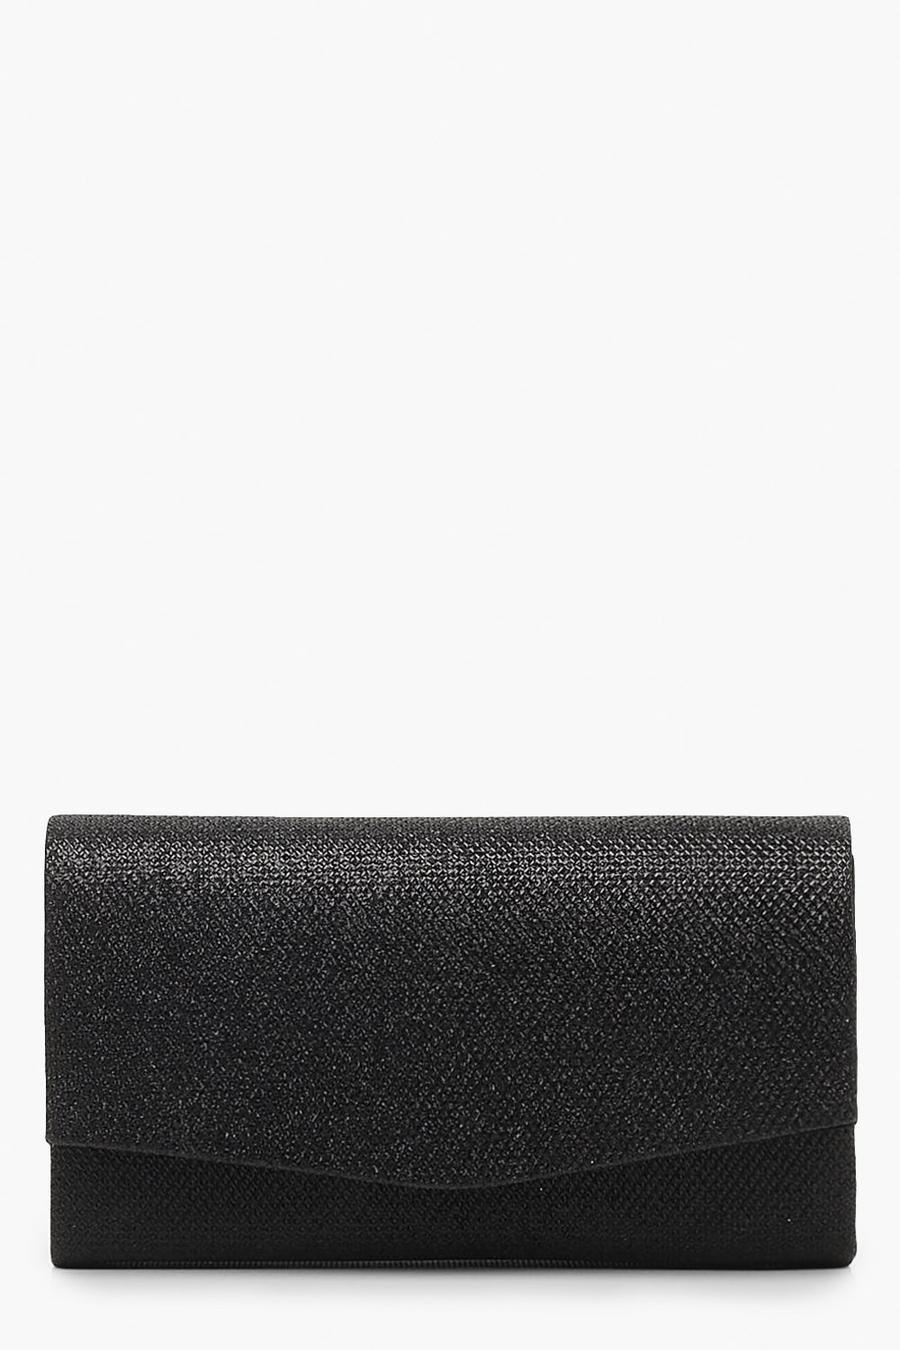 Black Glitter Envelope Clutch Bag and Chain image number 1